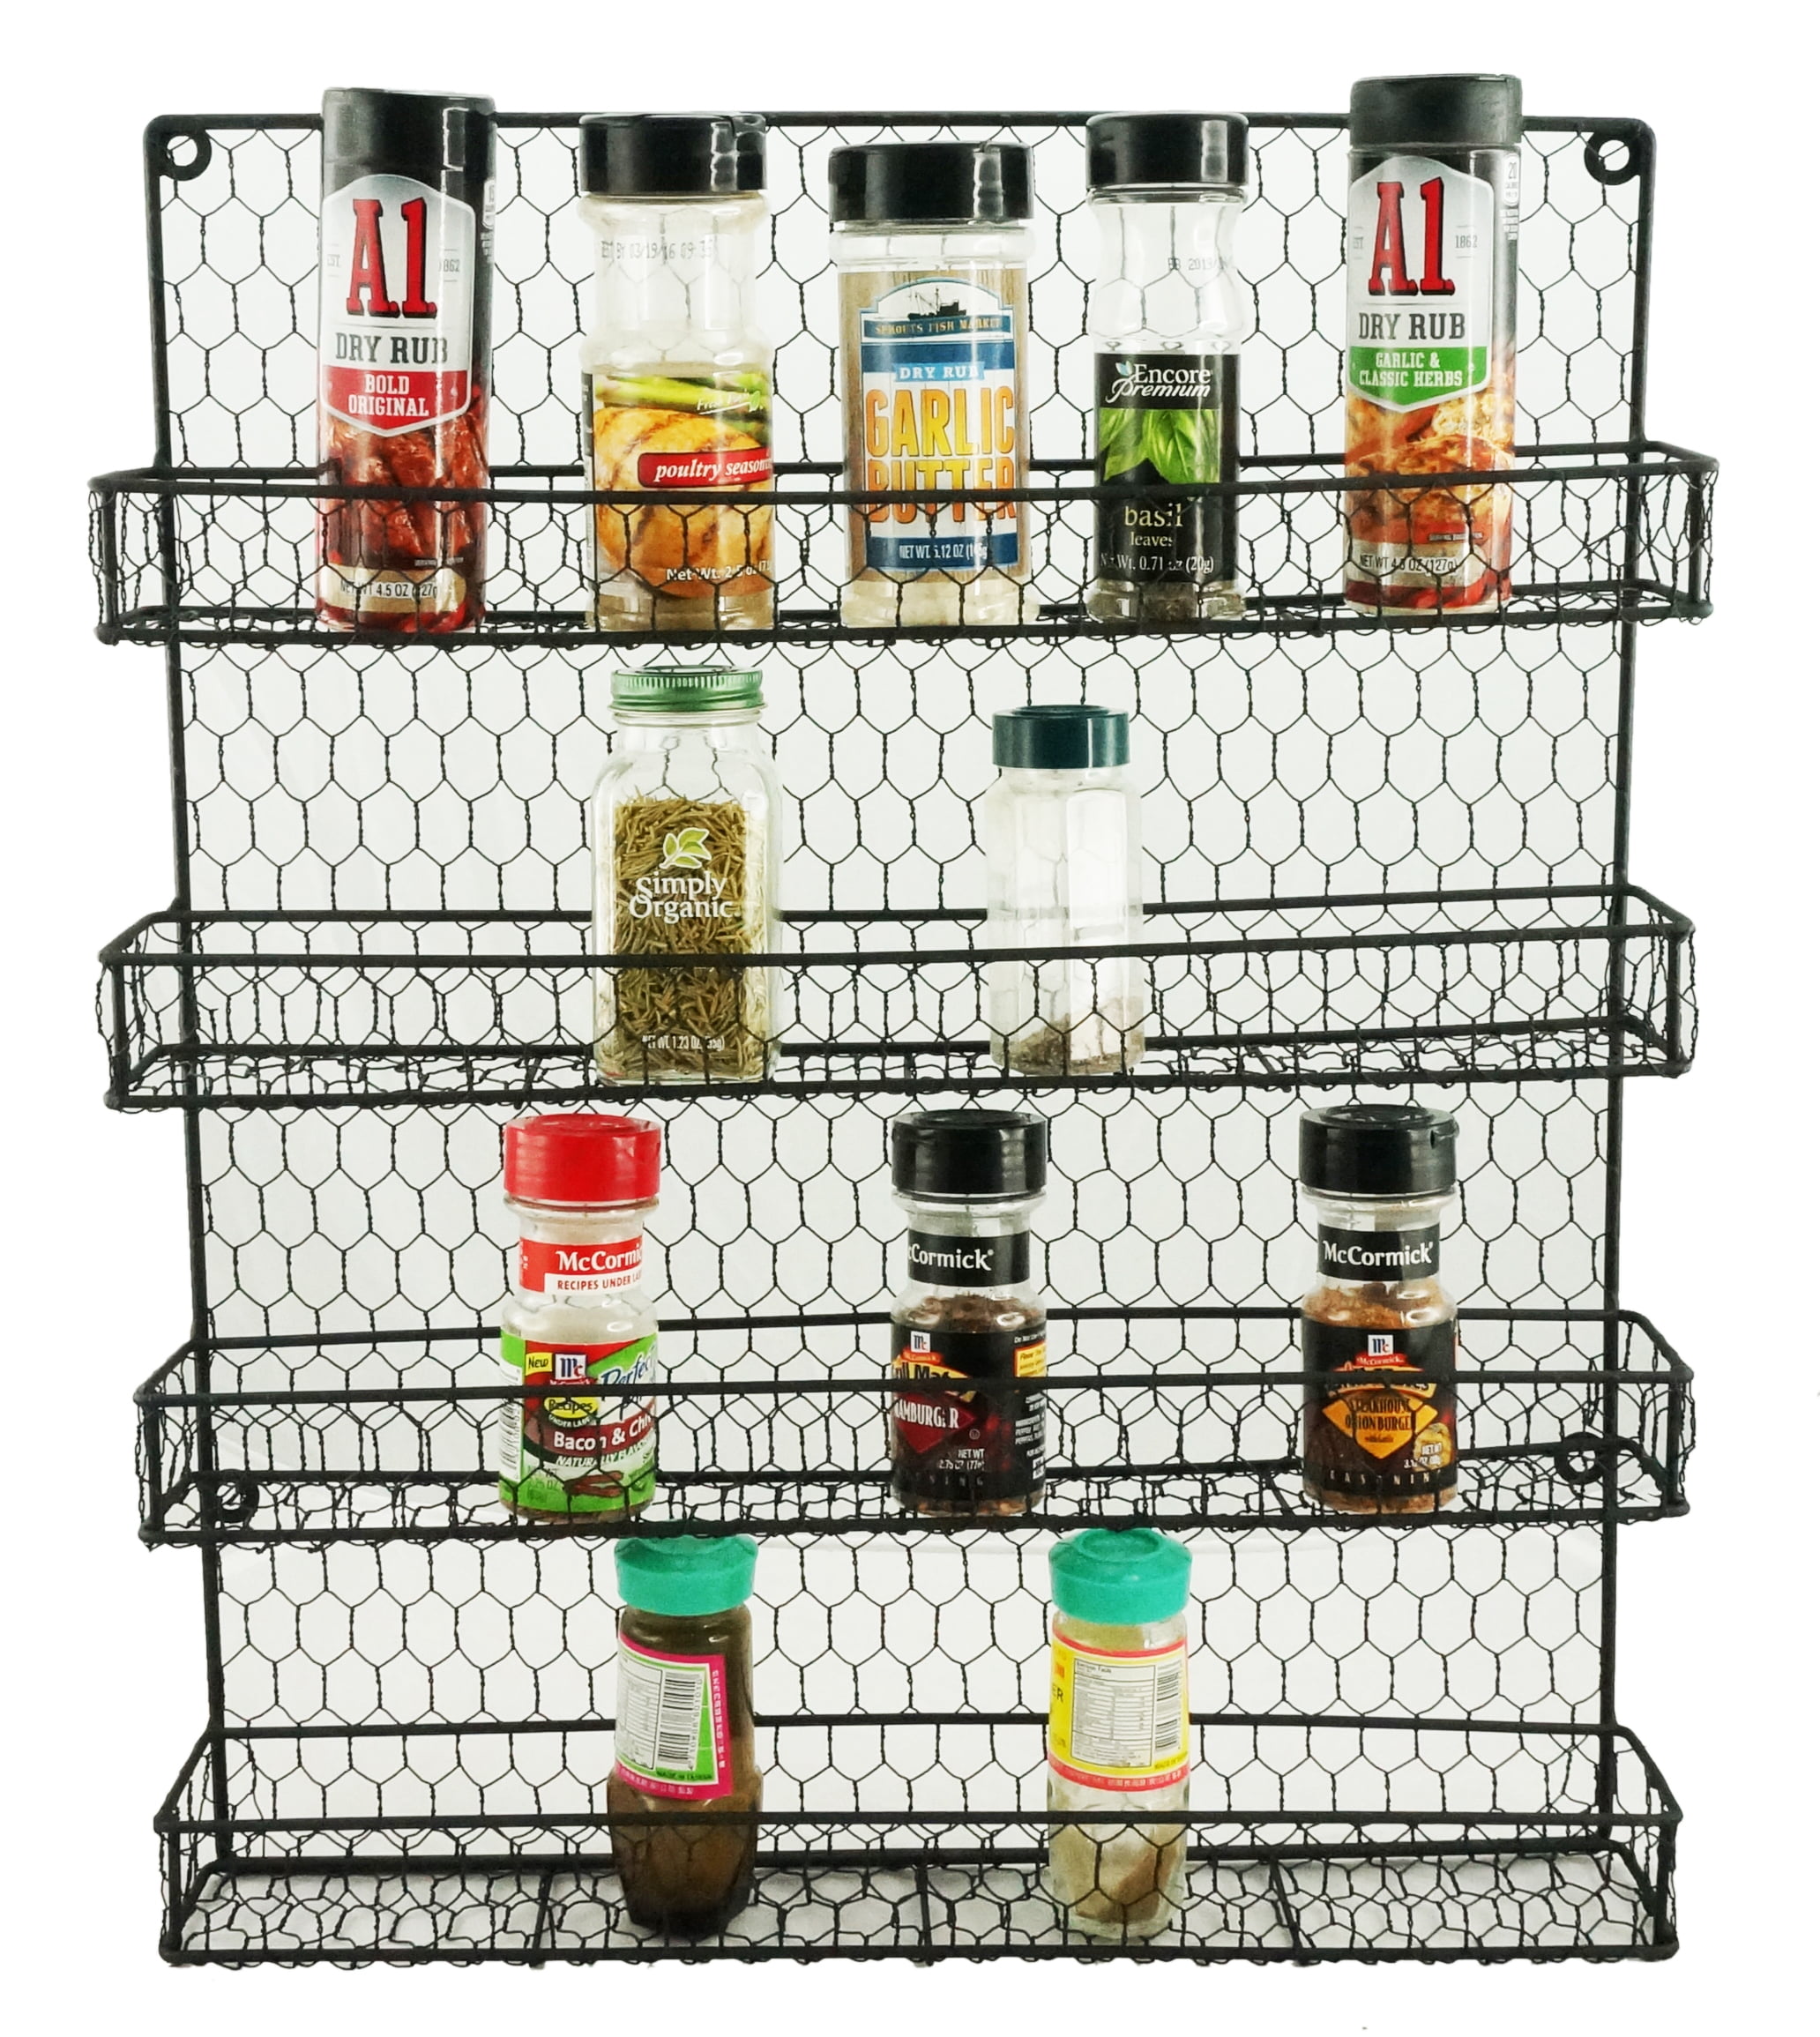 kjsSpice Rack Organizer Wall Mounted 4-Tier Stackable Hanging Spice Jars  Storage